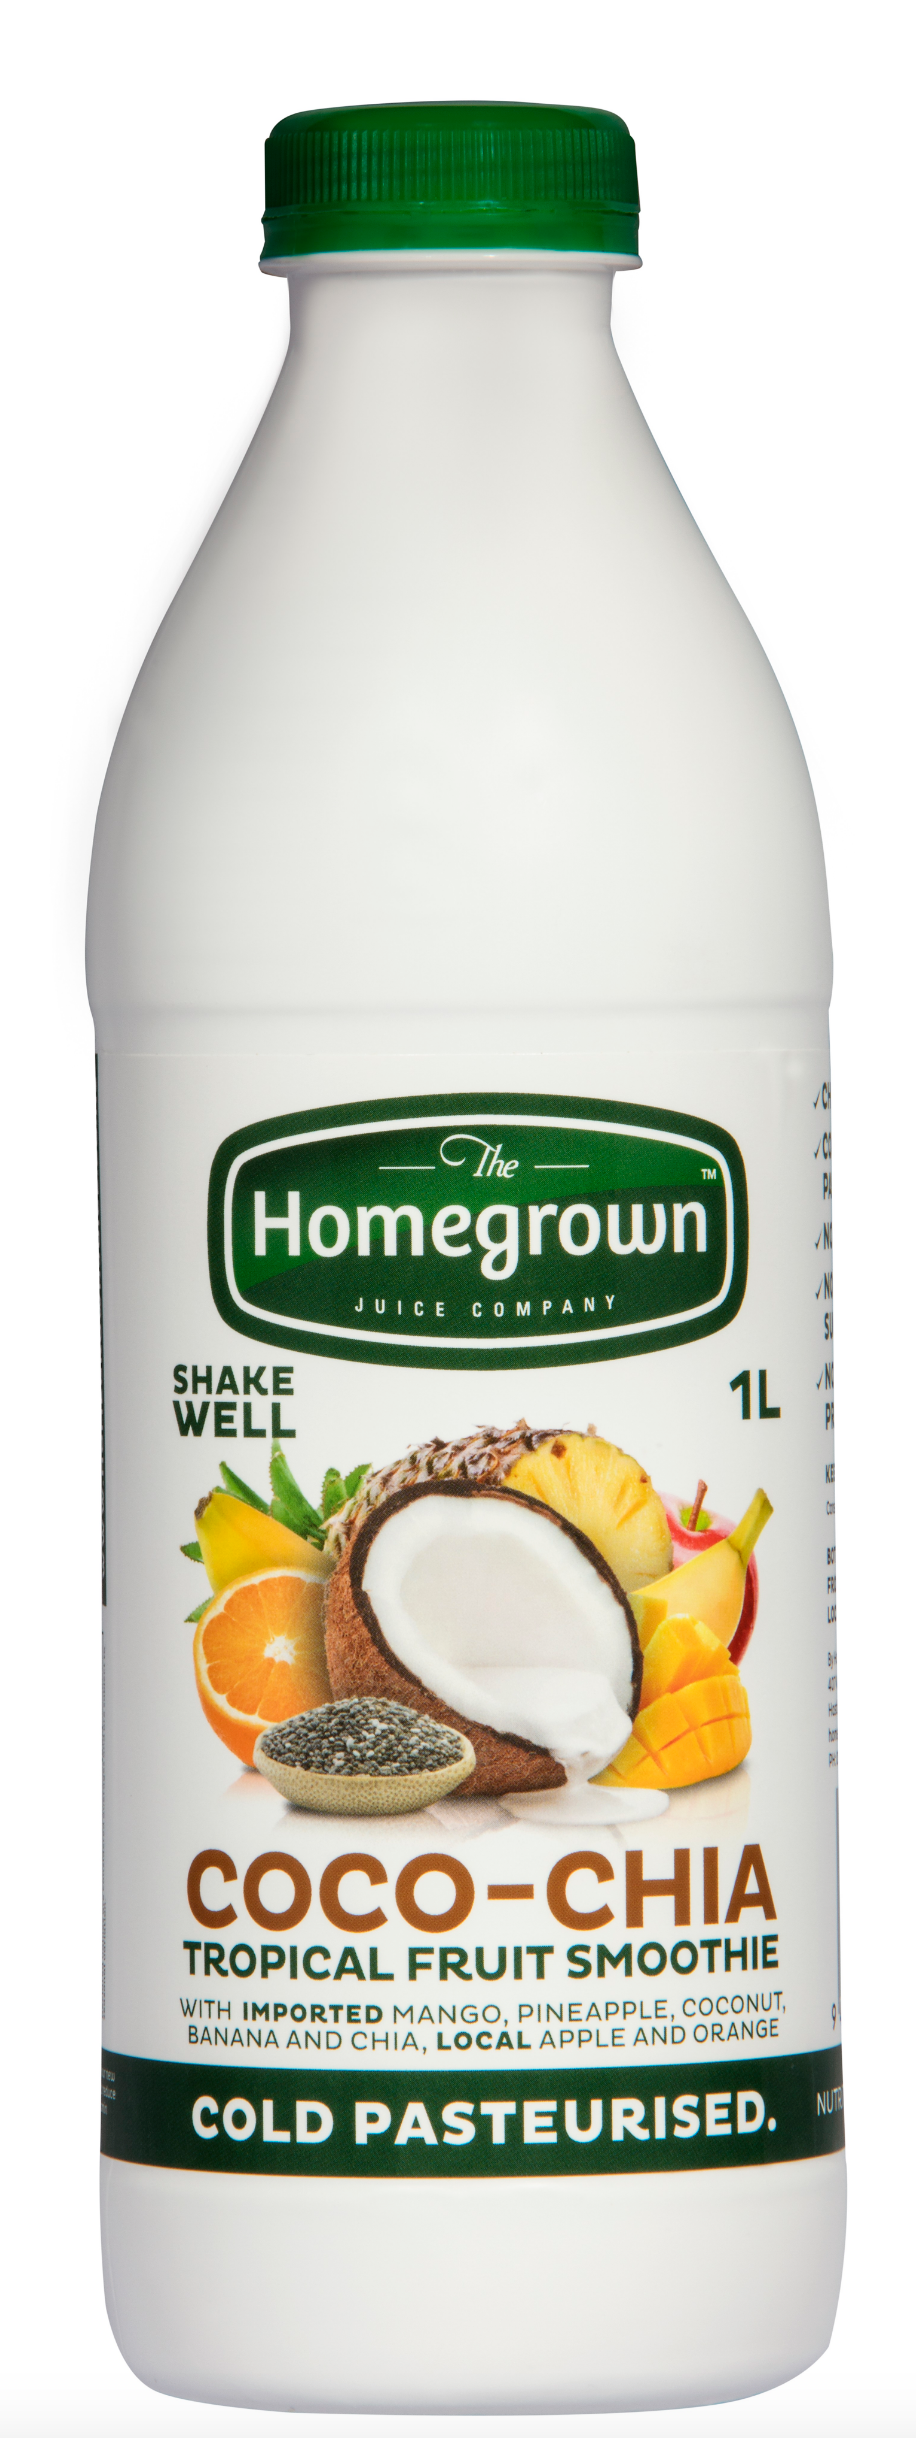 1L Homegrown Coco Chia Tropical Smoothie